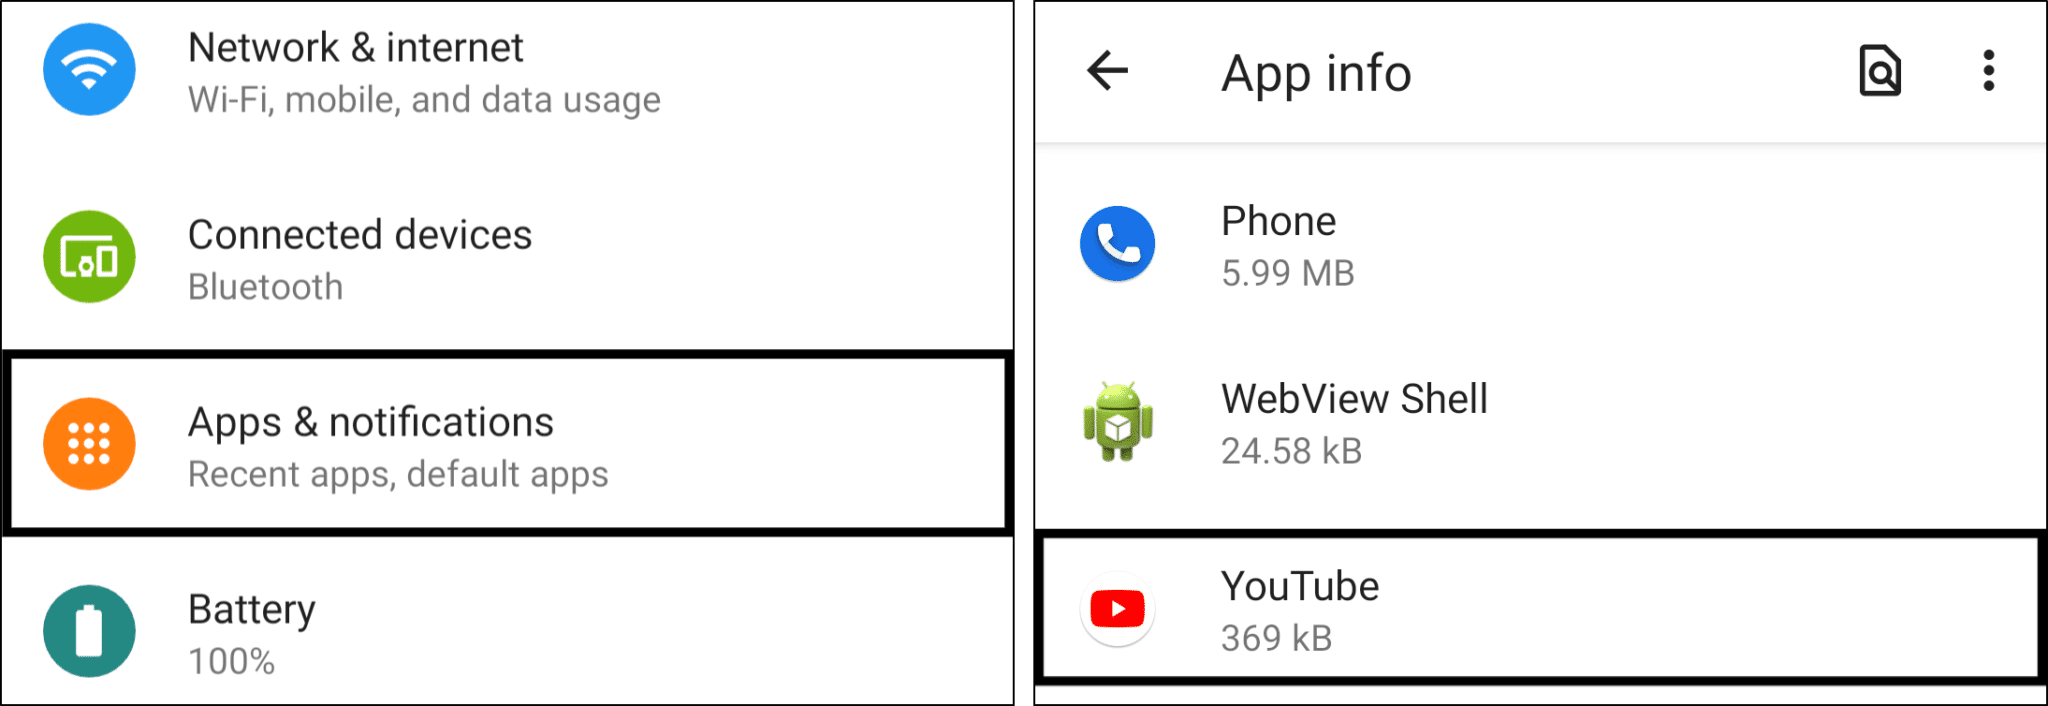 access YouTube app settings in system settings on Android to clear app cache and data to fix YouTube subtitles, automatic, or closed captions not working